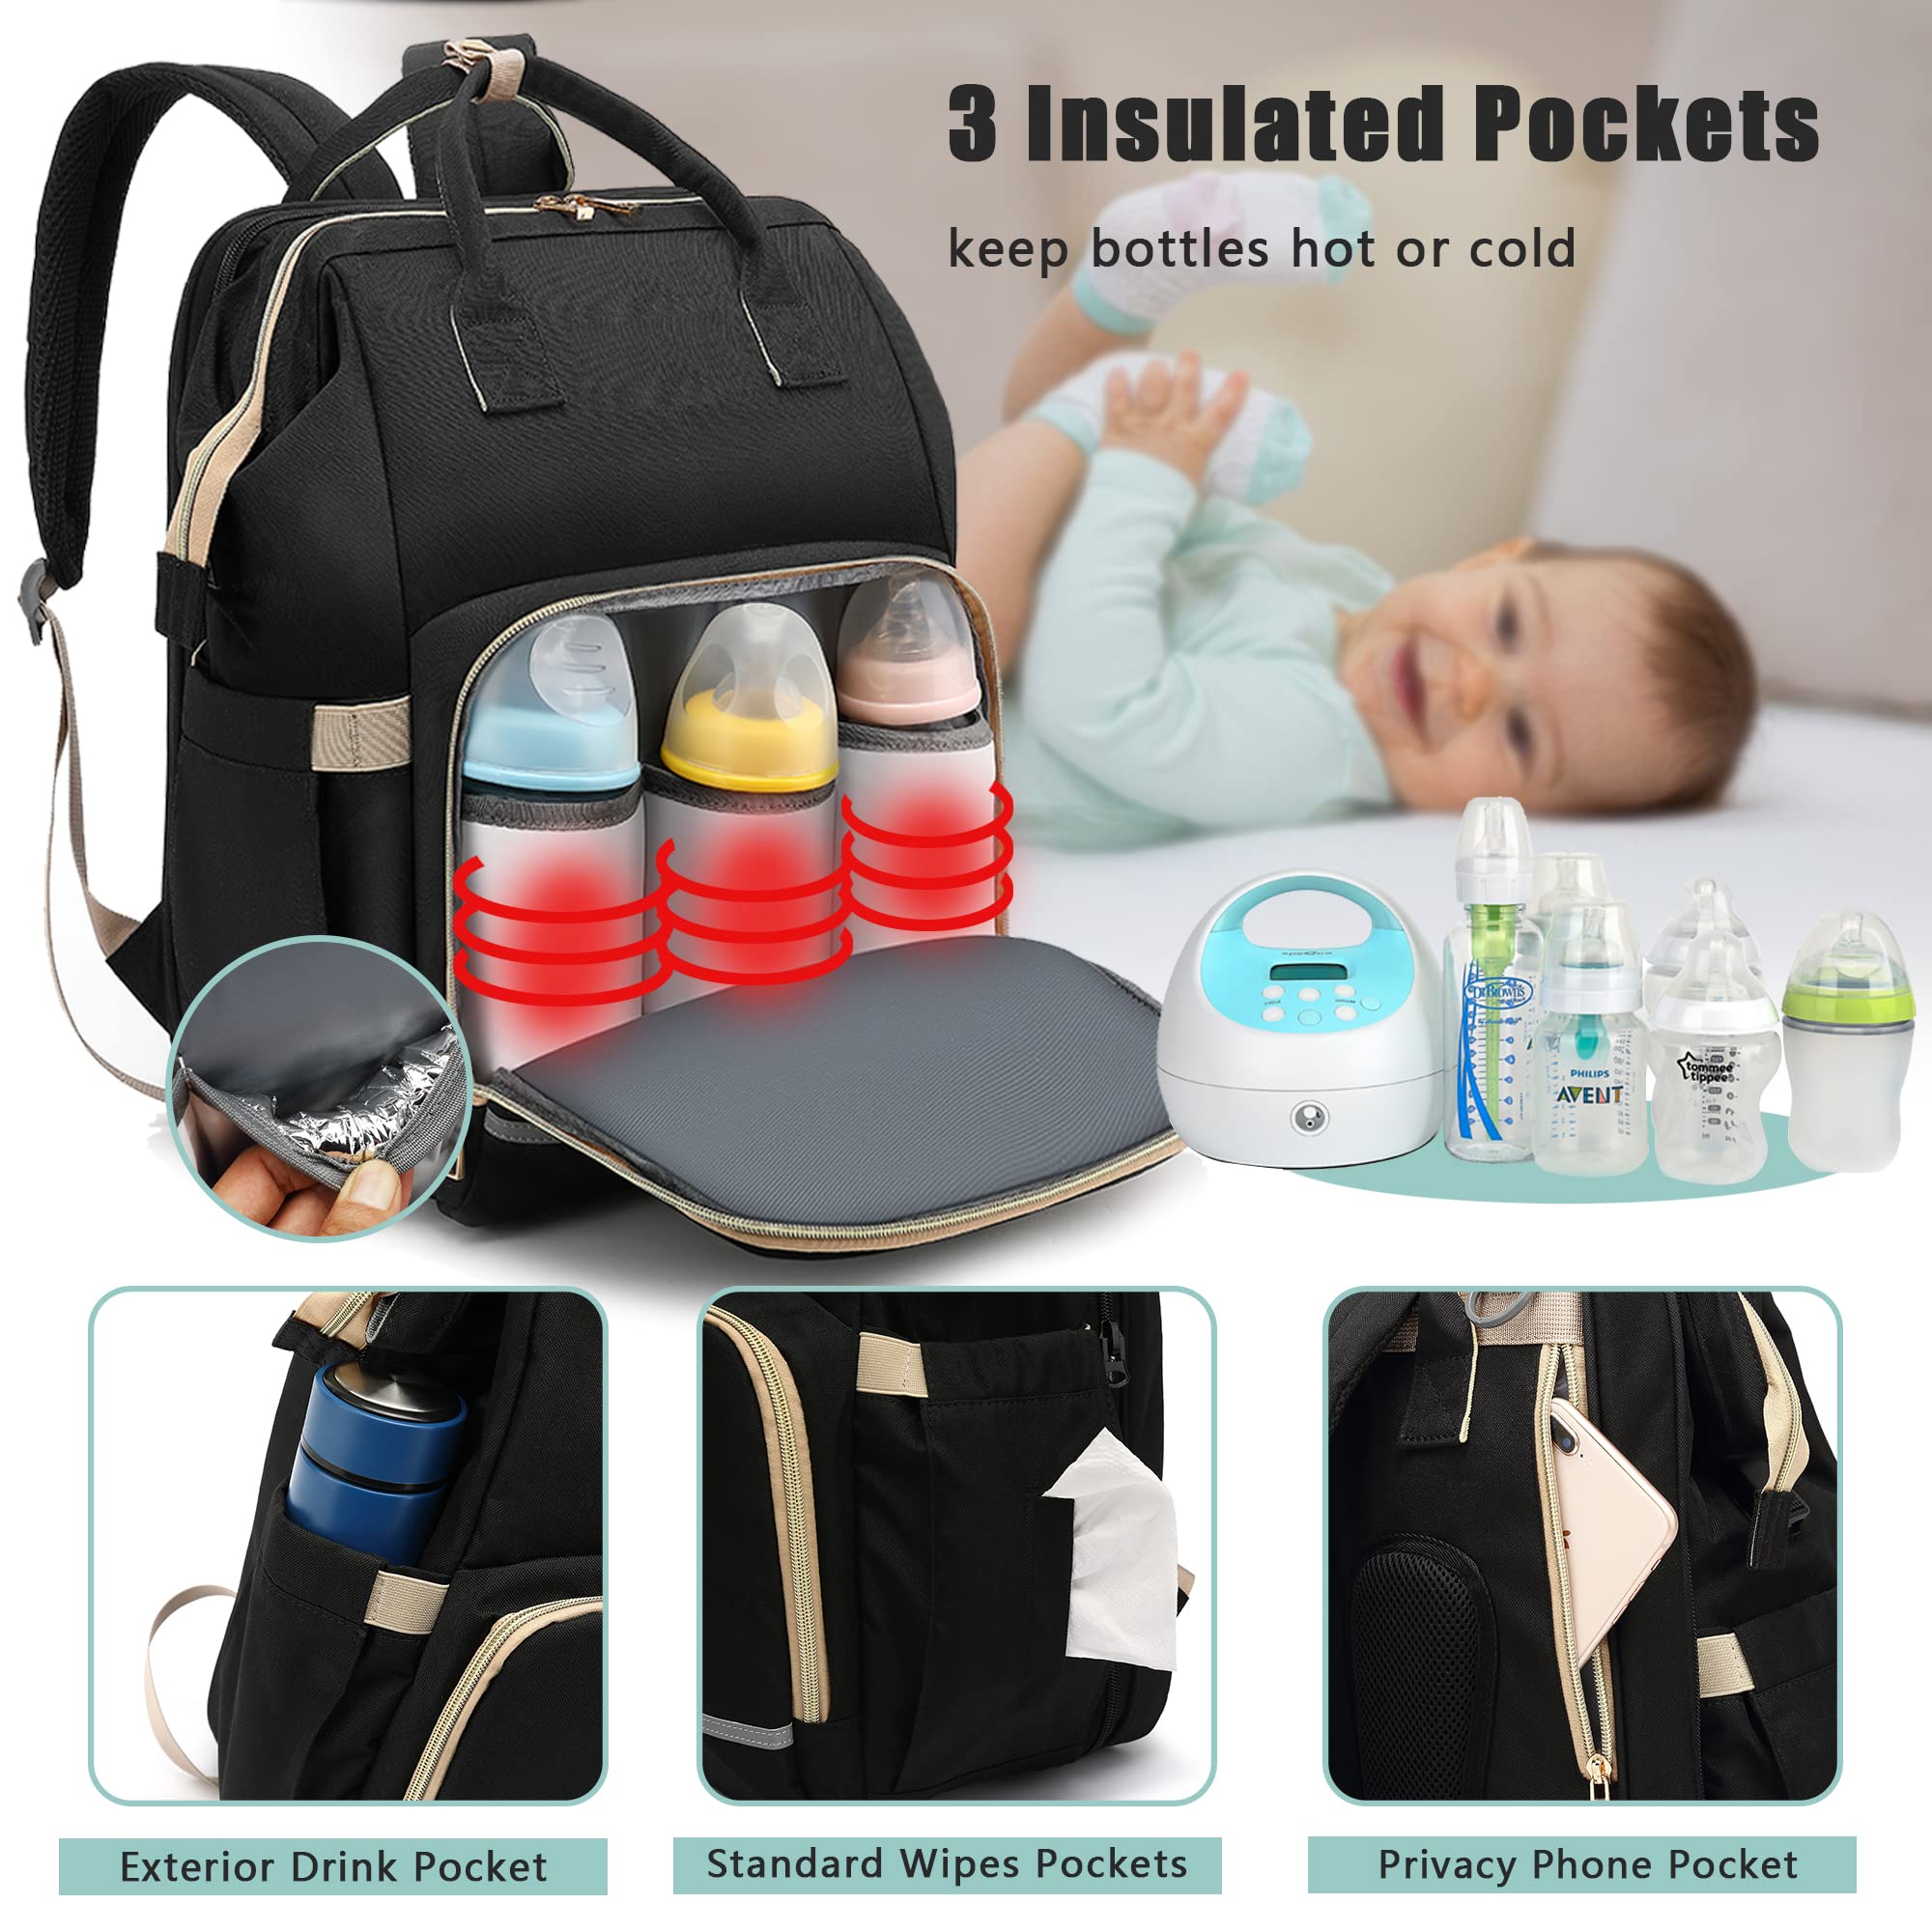 ROSEGIN Baby Diaper Bag Backpack with Changing Station for Boy Girl, Baby Registry Search Shower Gifts Baby Stuff for Newborn Essentials Must Haves, Dad Mom Travel Large Black Diaper Bags